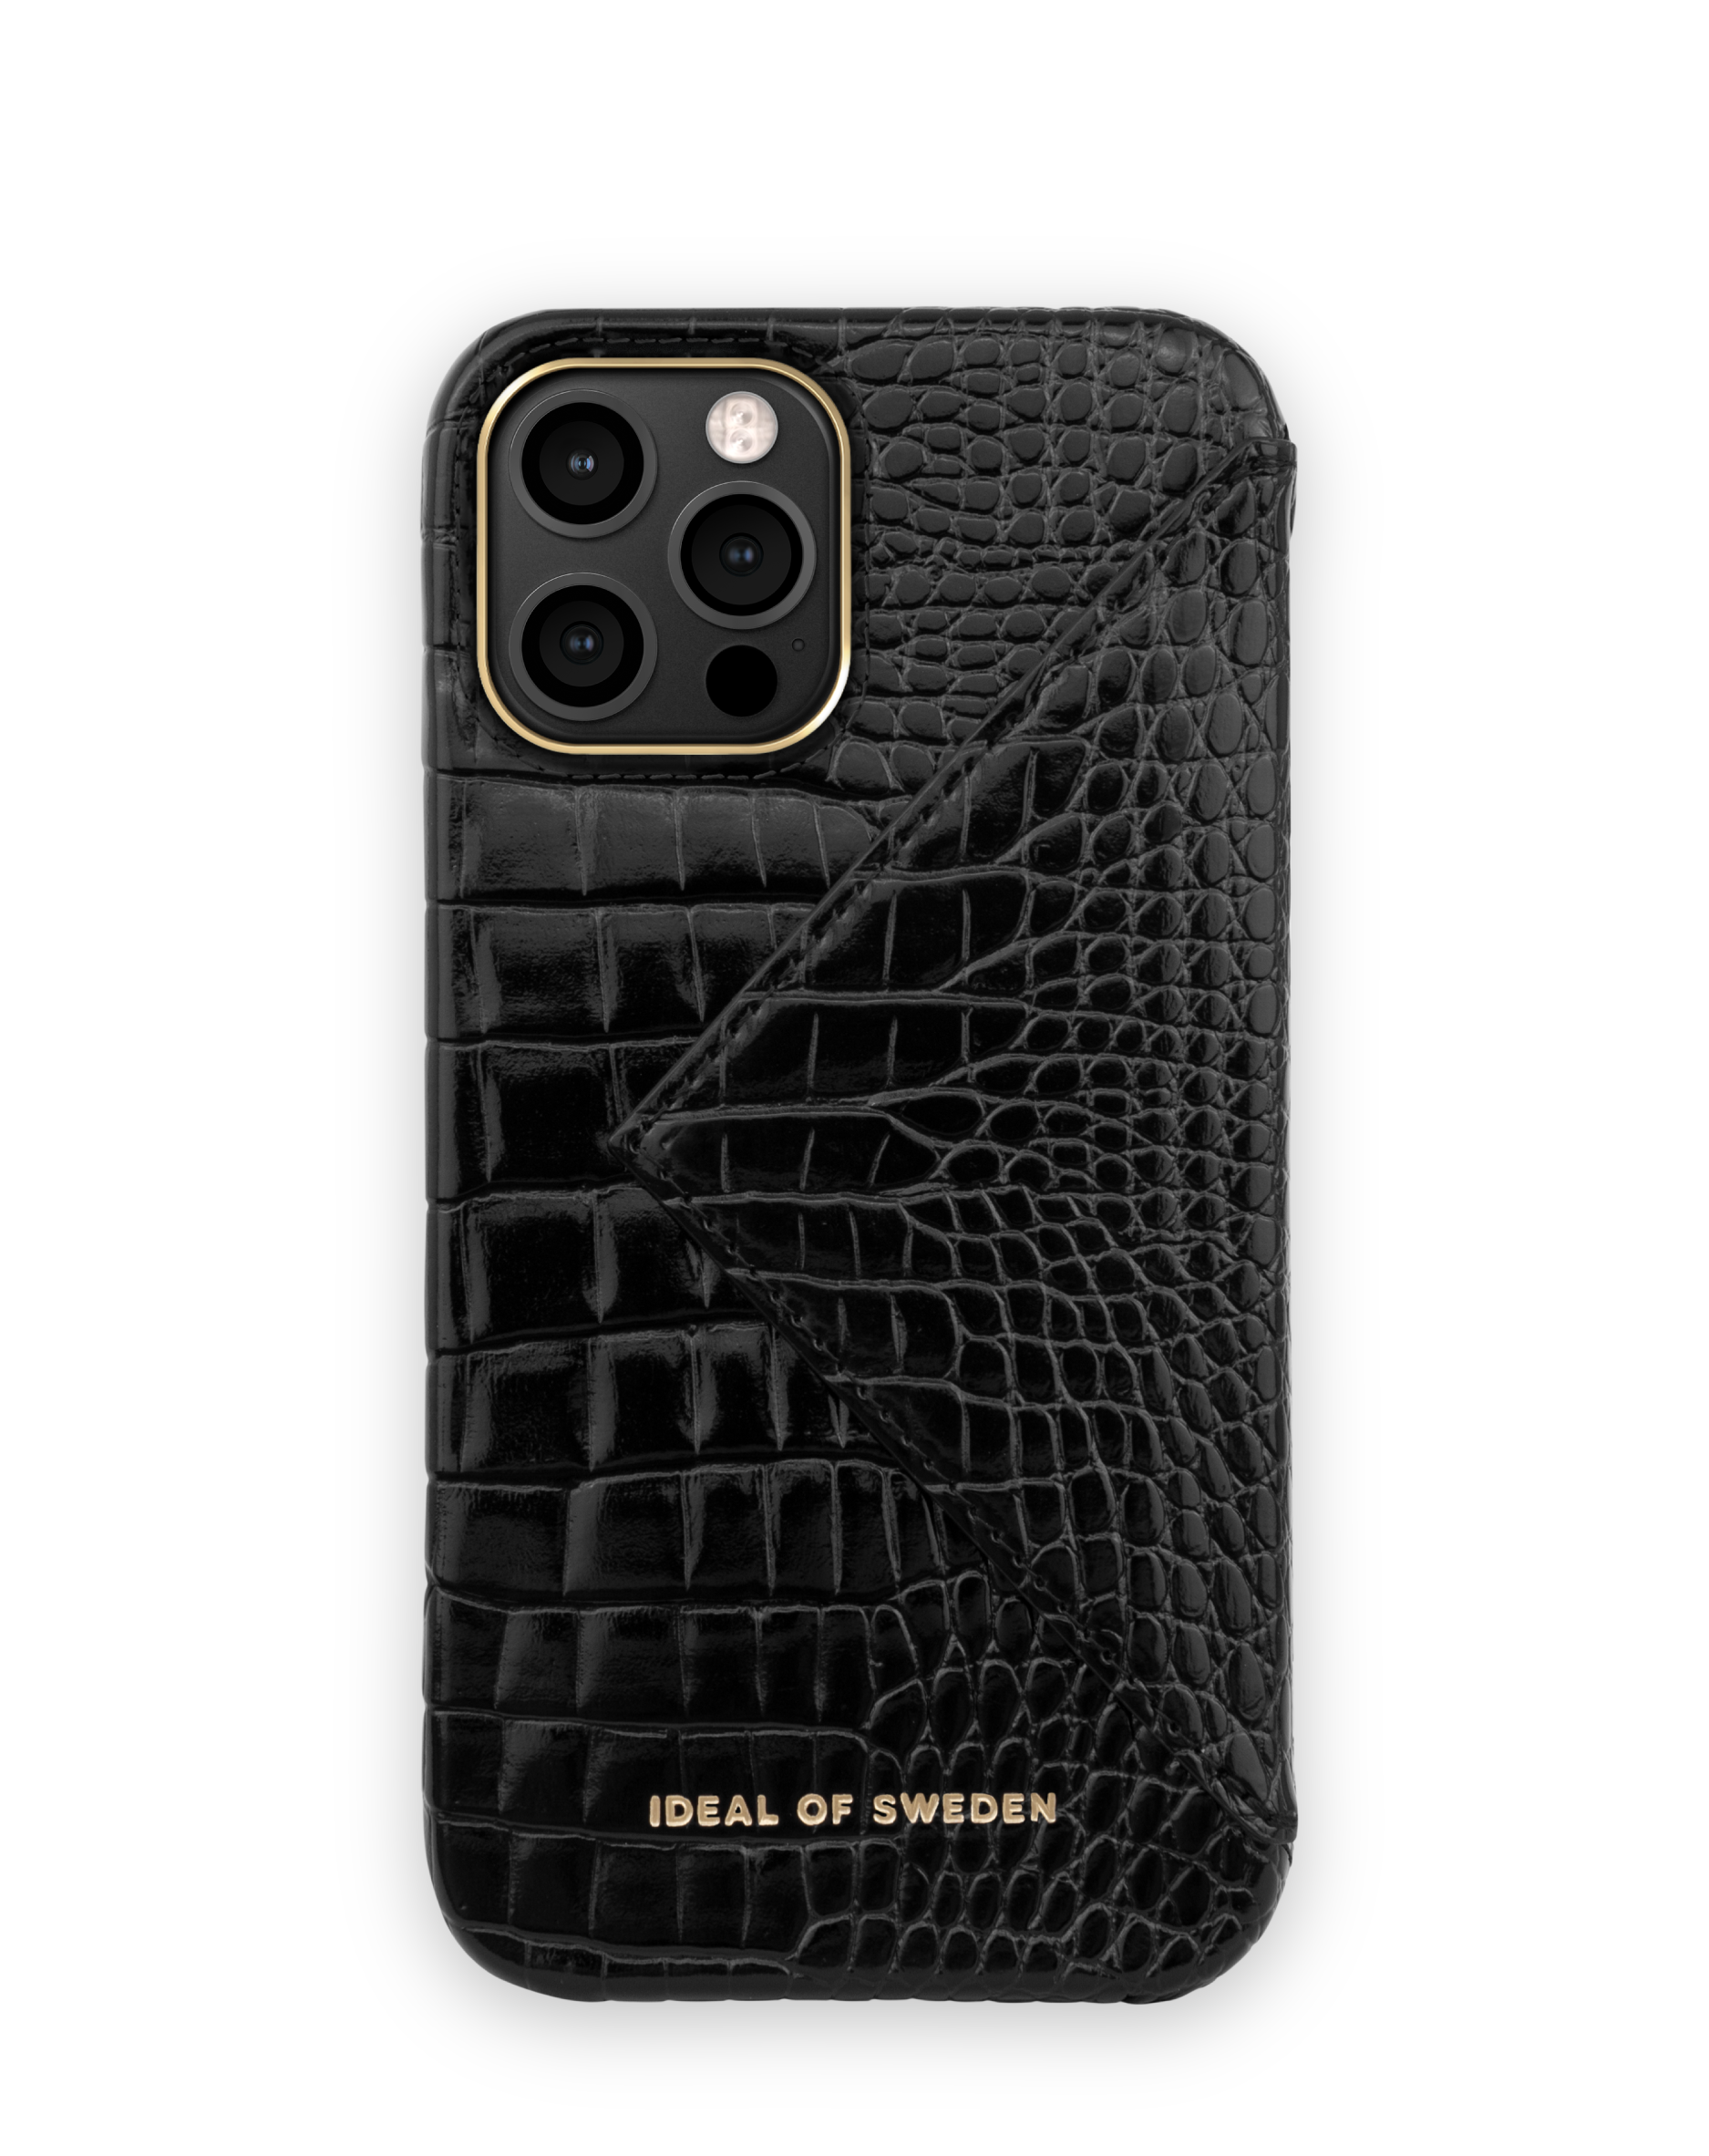 SWEDEN IPhone Pro IDEAL Neo Noir Backcover, 12 OF Apple, Croco IDSCAW20-2067, Max,